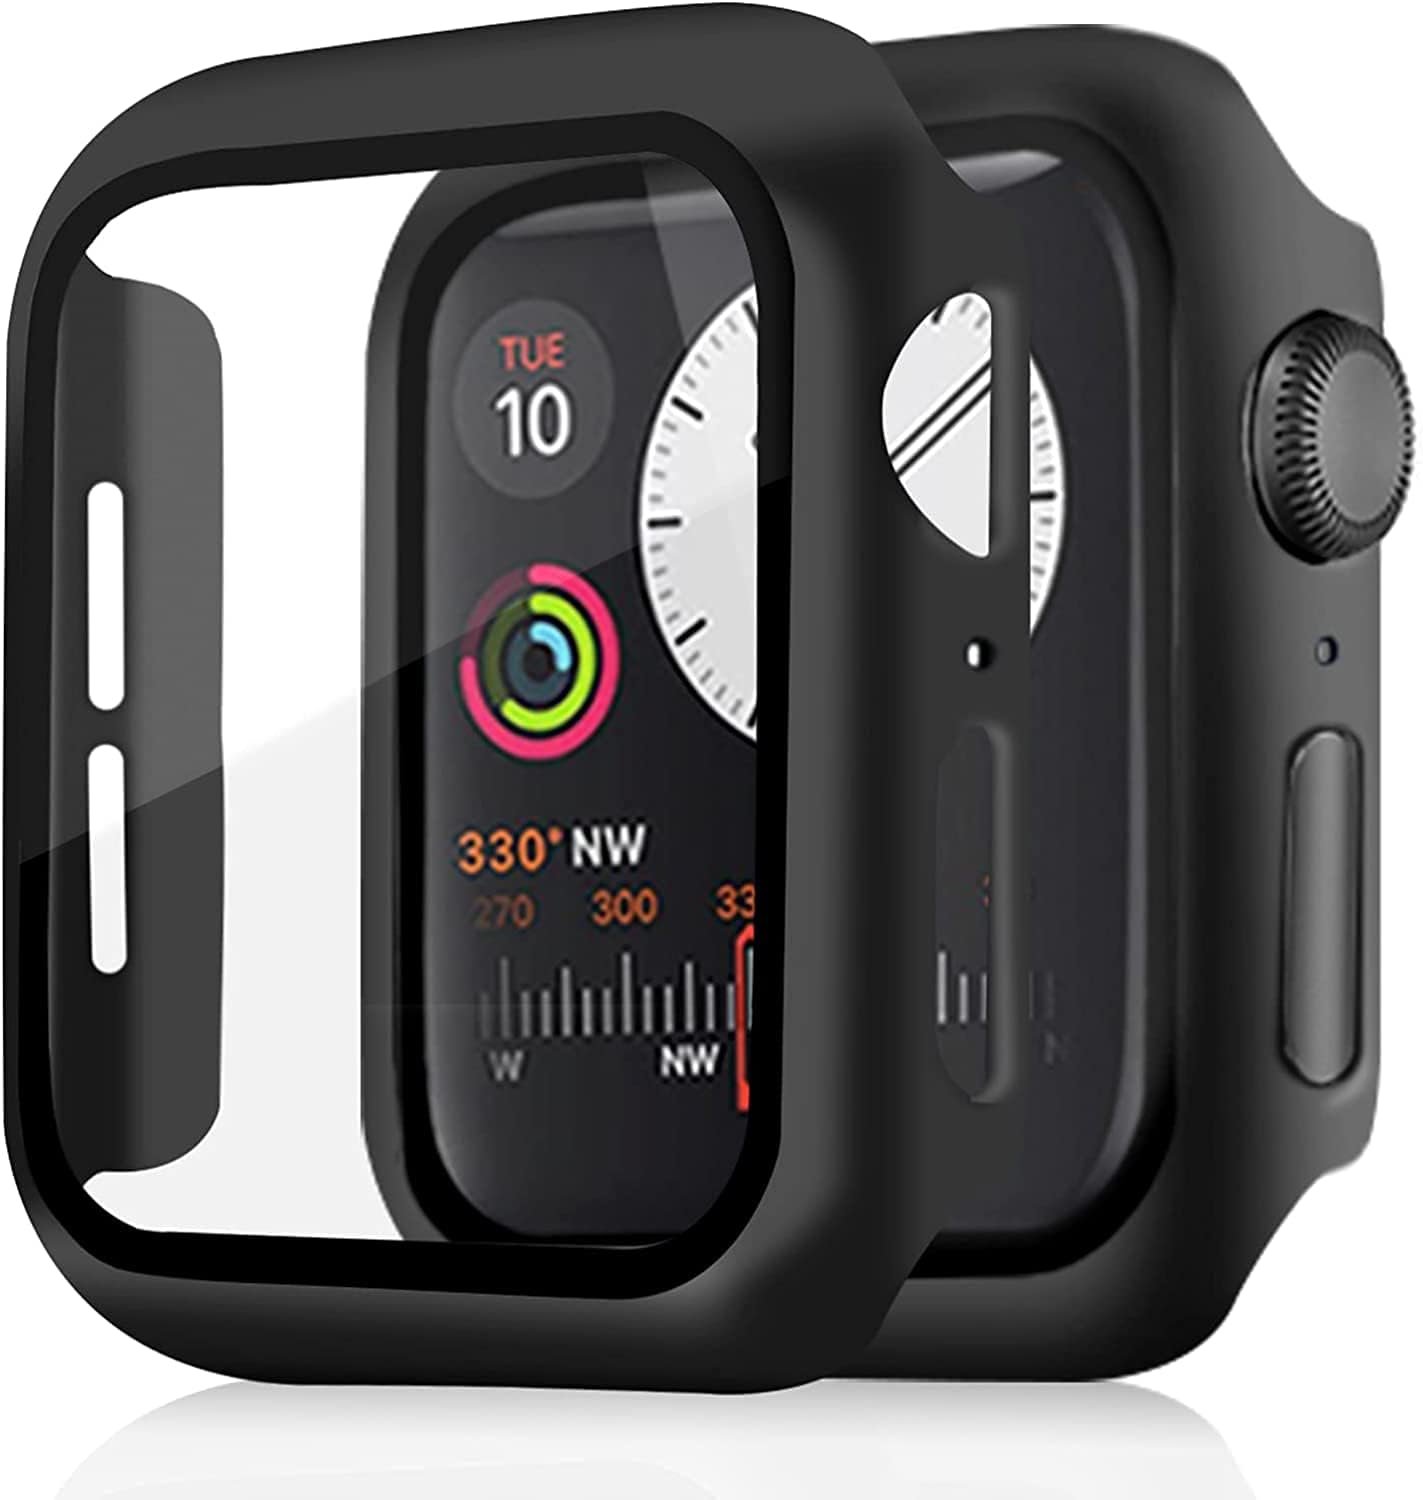 New Apple Watch PC protective case + tempered film 2-in-1 anti-drop.